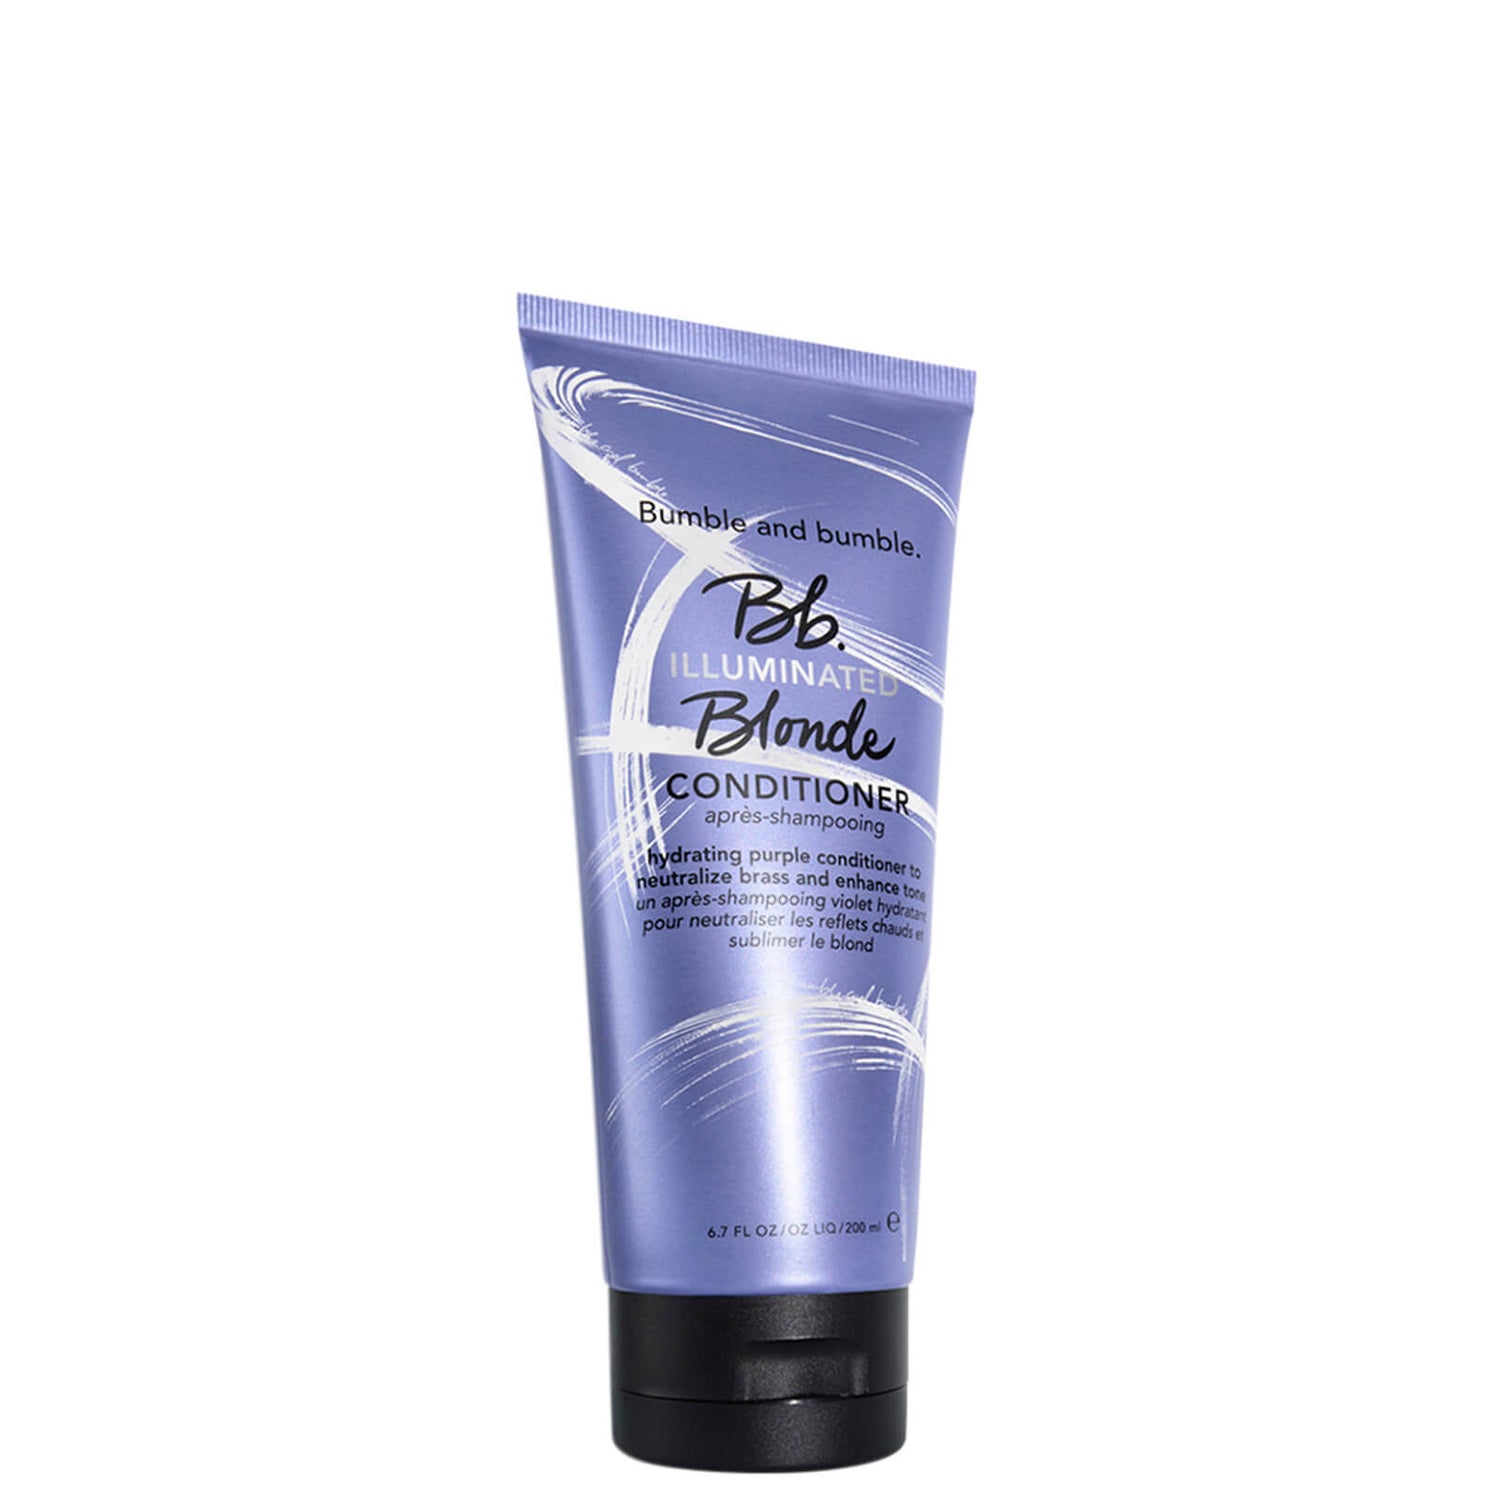 Bumble and bumble Blonde Conditioner (Various Sizes)